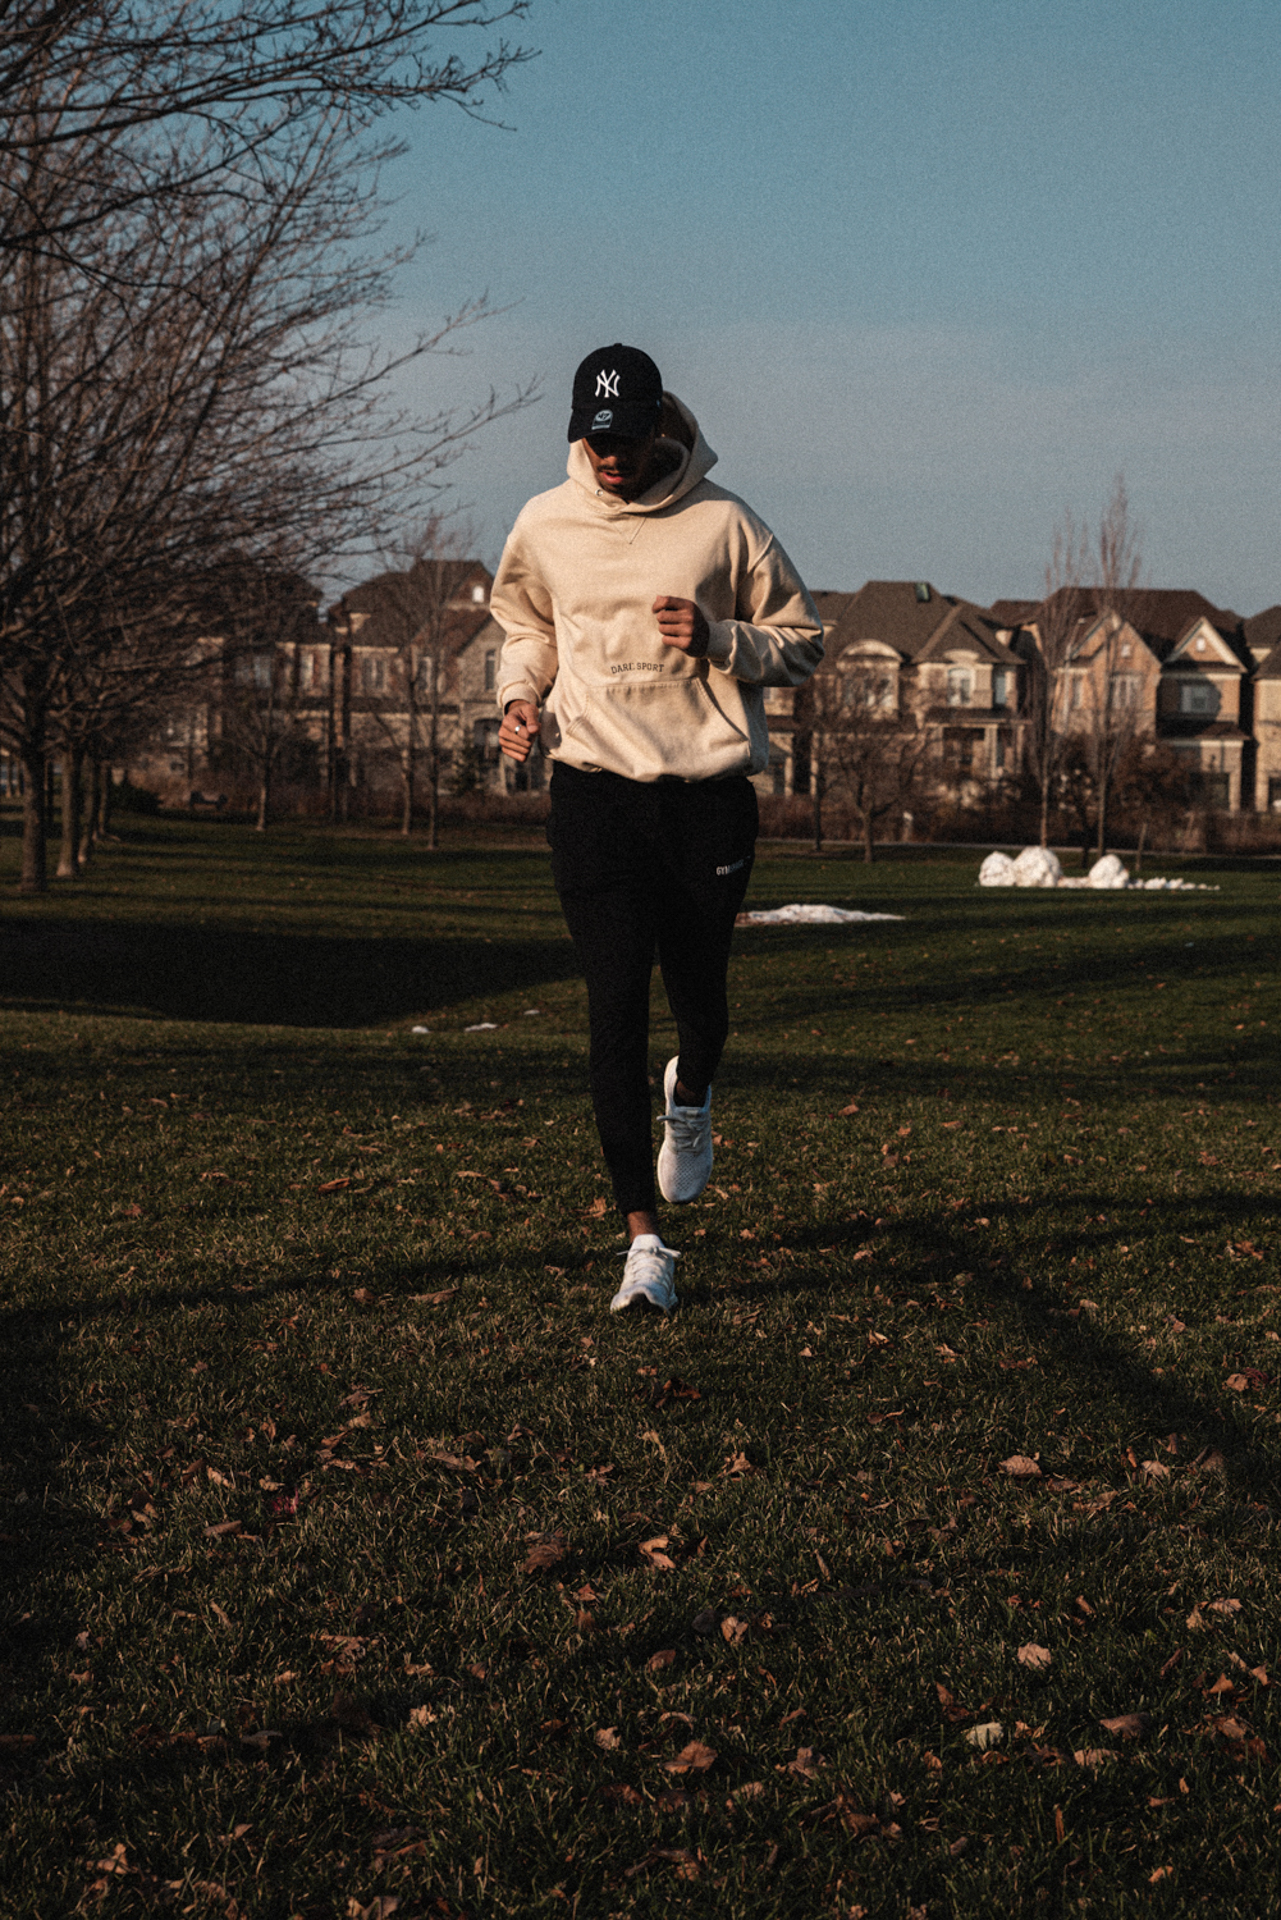 This photo depicts a man wearing athletic clothing running through a field on a bright day. There are houses behind him and brown leaves that cover the grass he is running on.